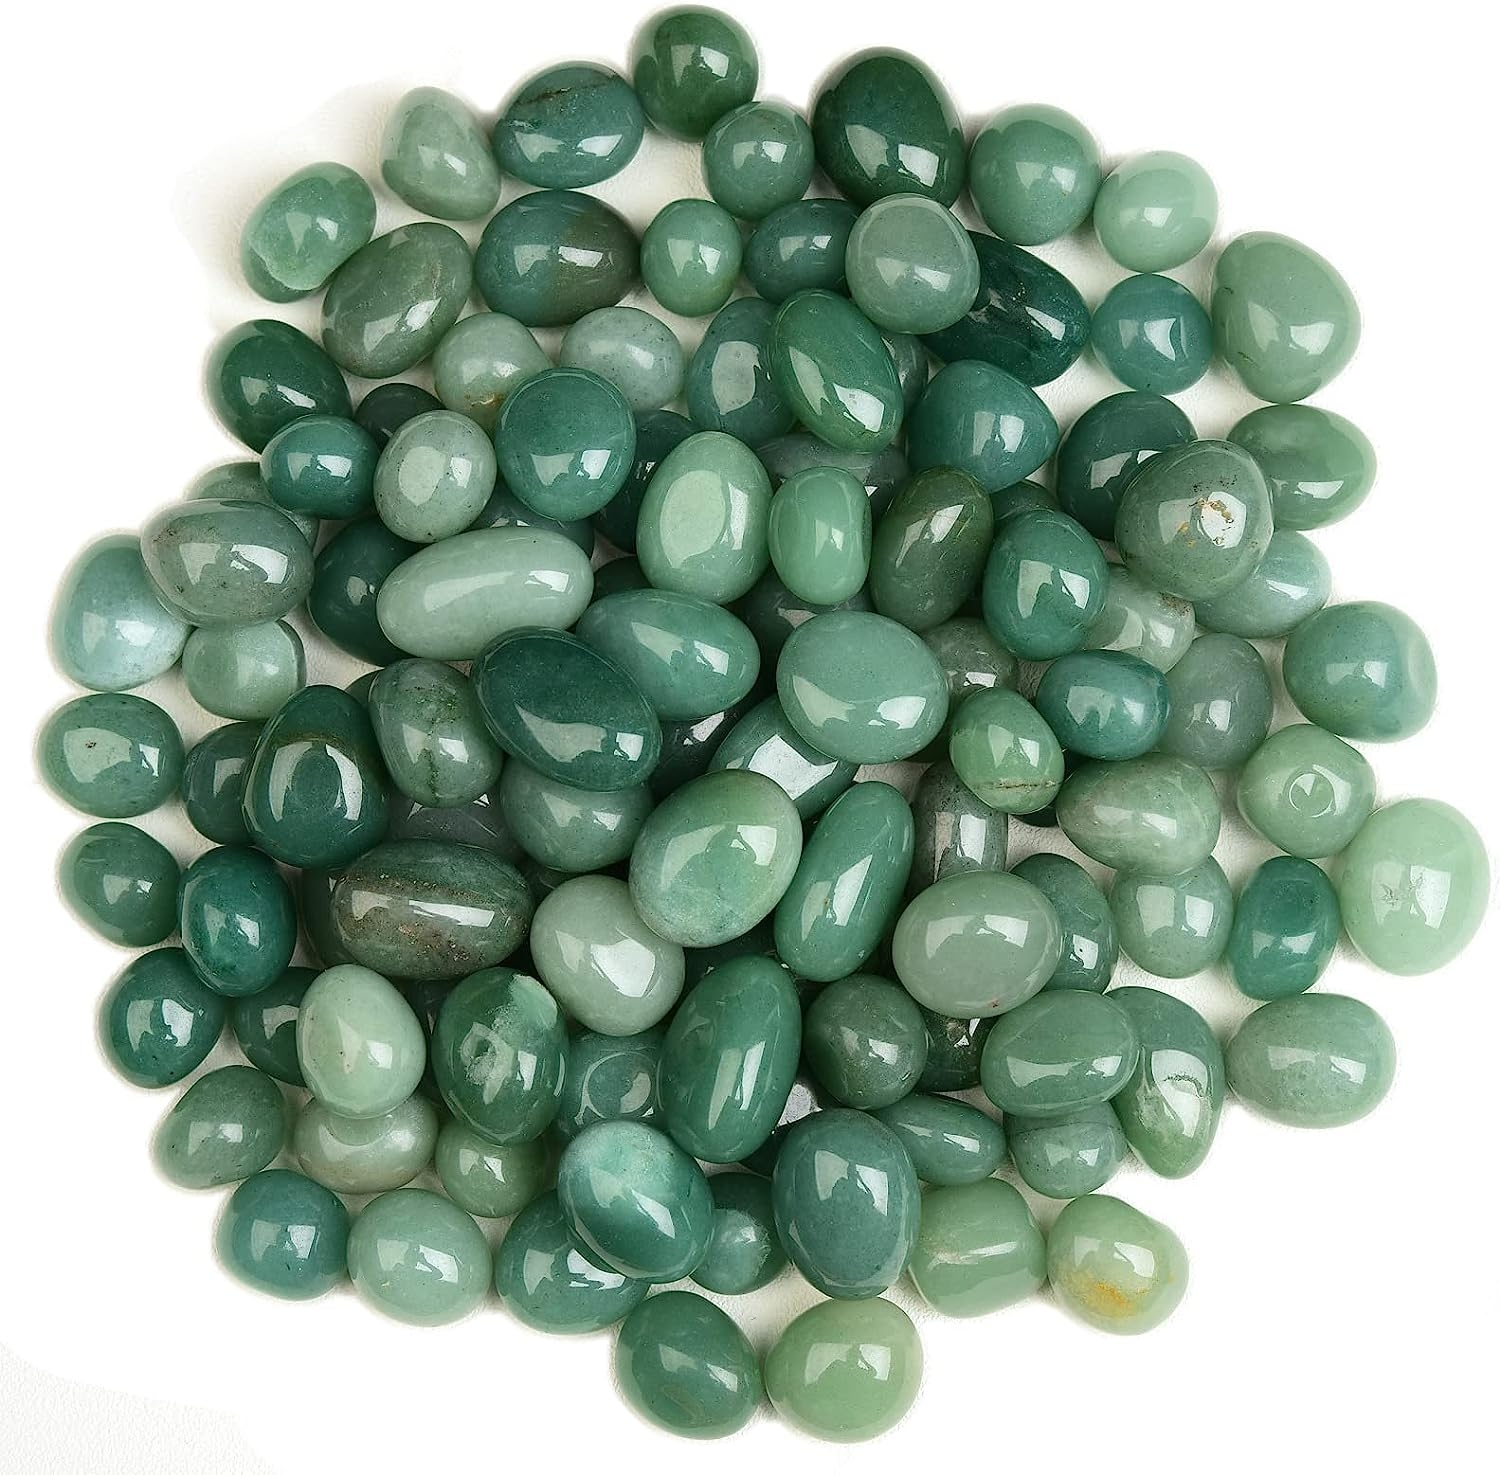 Ainuosen 1LB Natural Polished Tumbled Blue Aventurine Healing Crystals Stones 0.8-1.2 inch,Decorative Plant Rocks,Marbles for